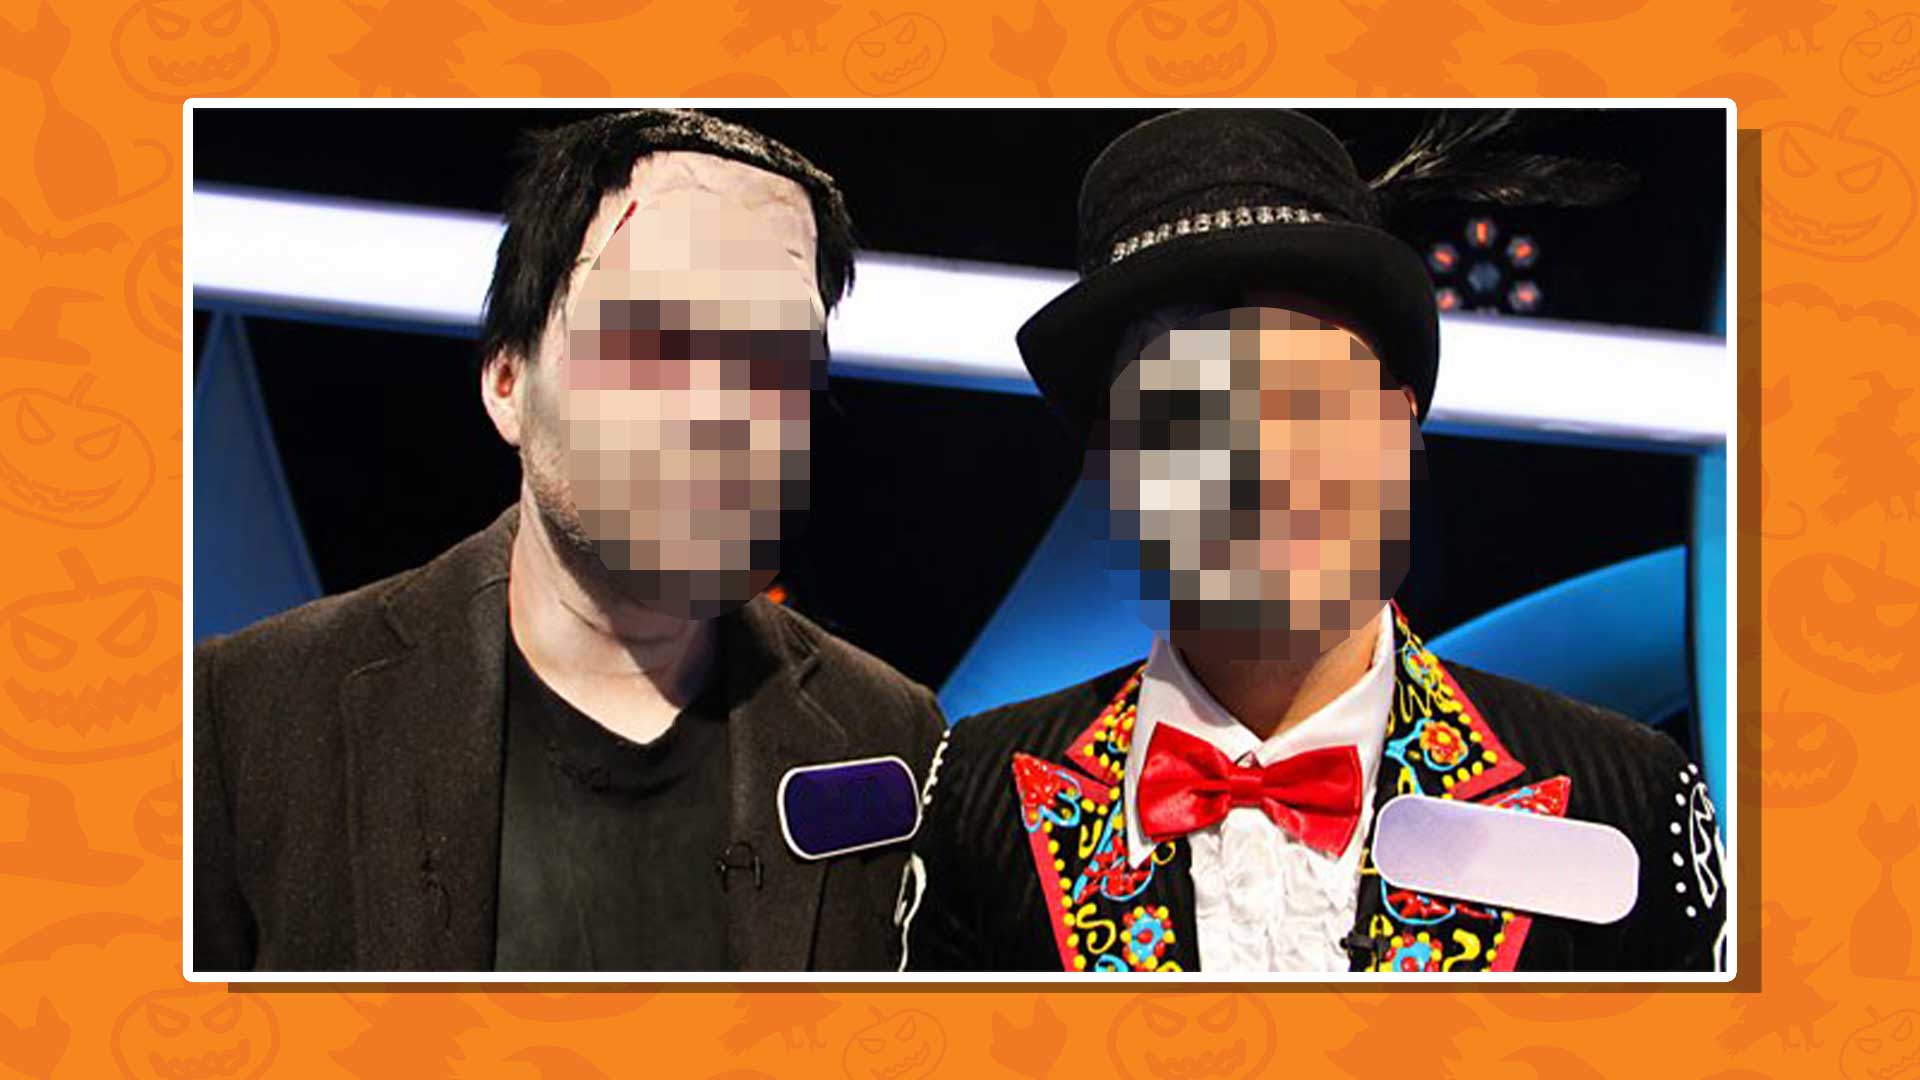 Two CBBC presenters dressed in Halloween costumes